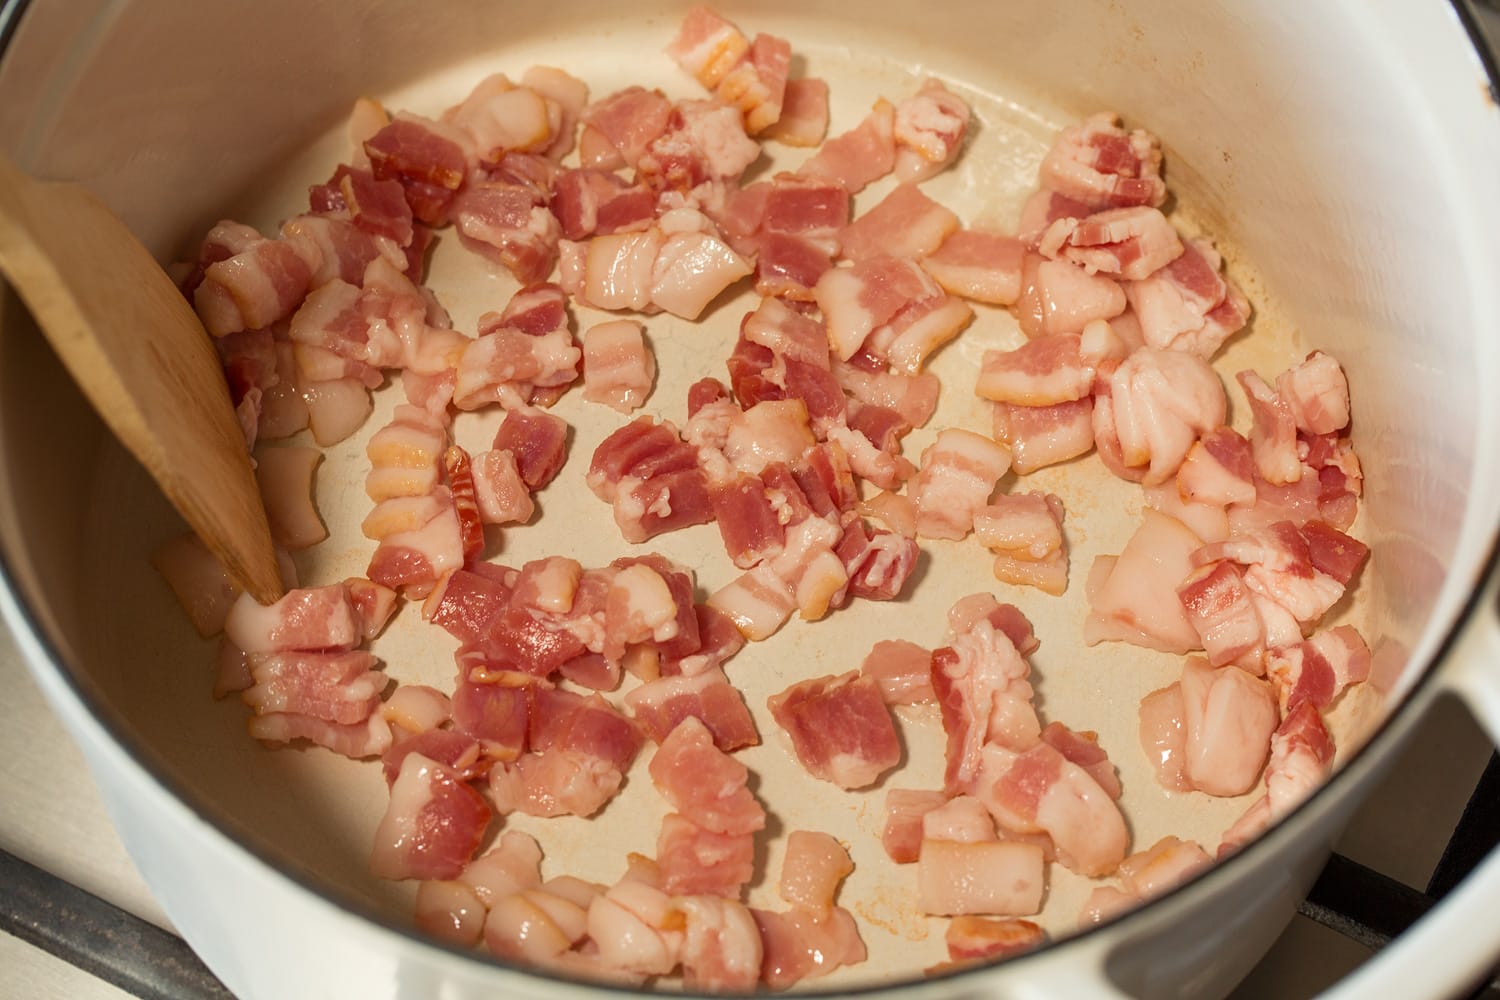 Chopped bacon in a pot before cooking.